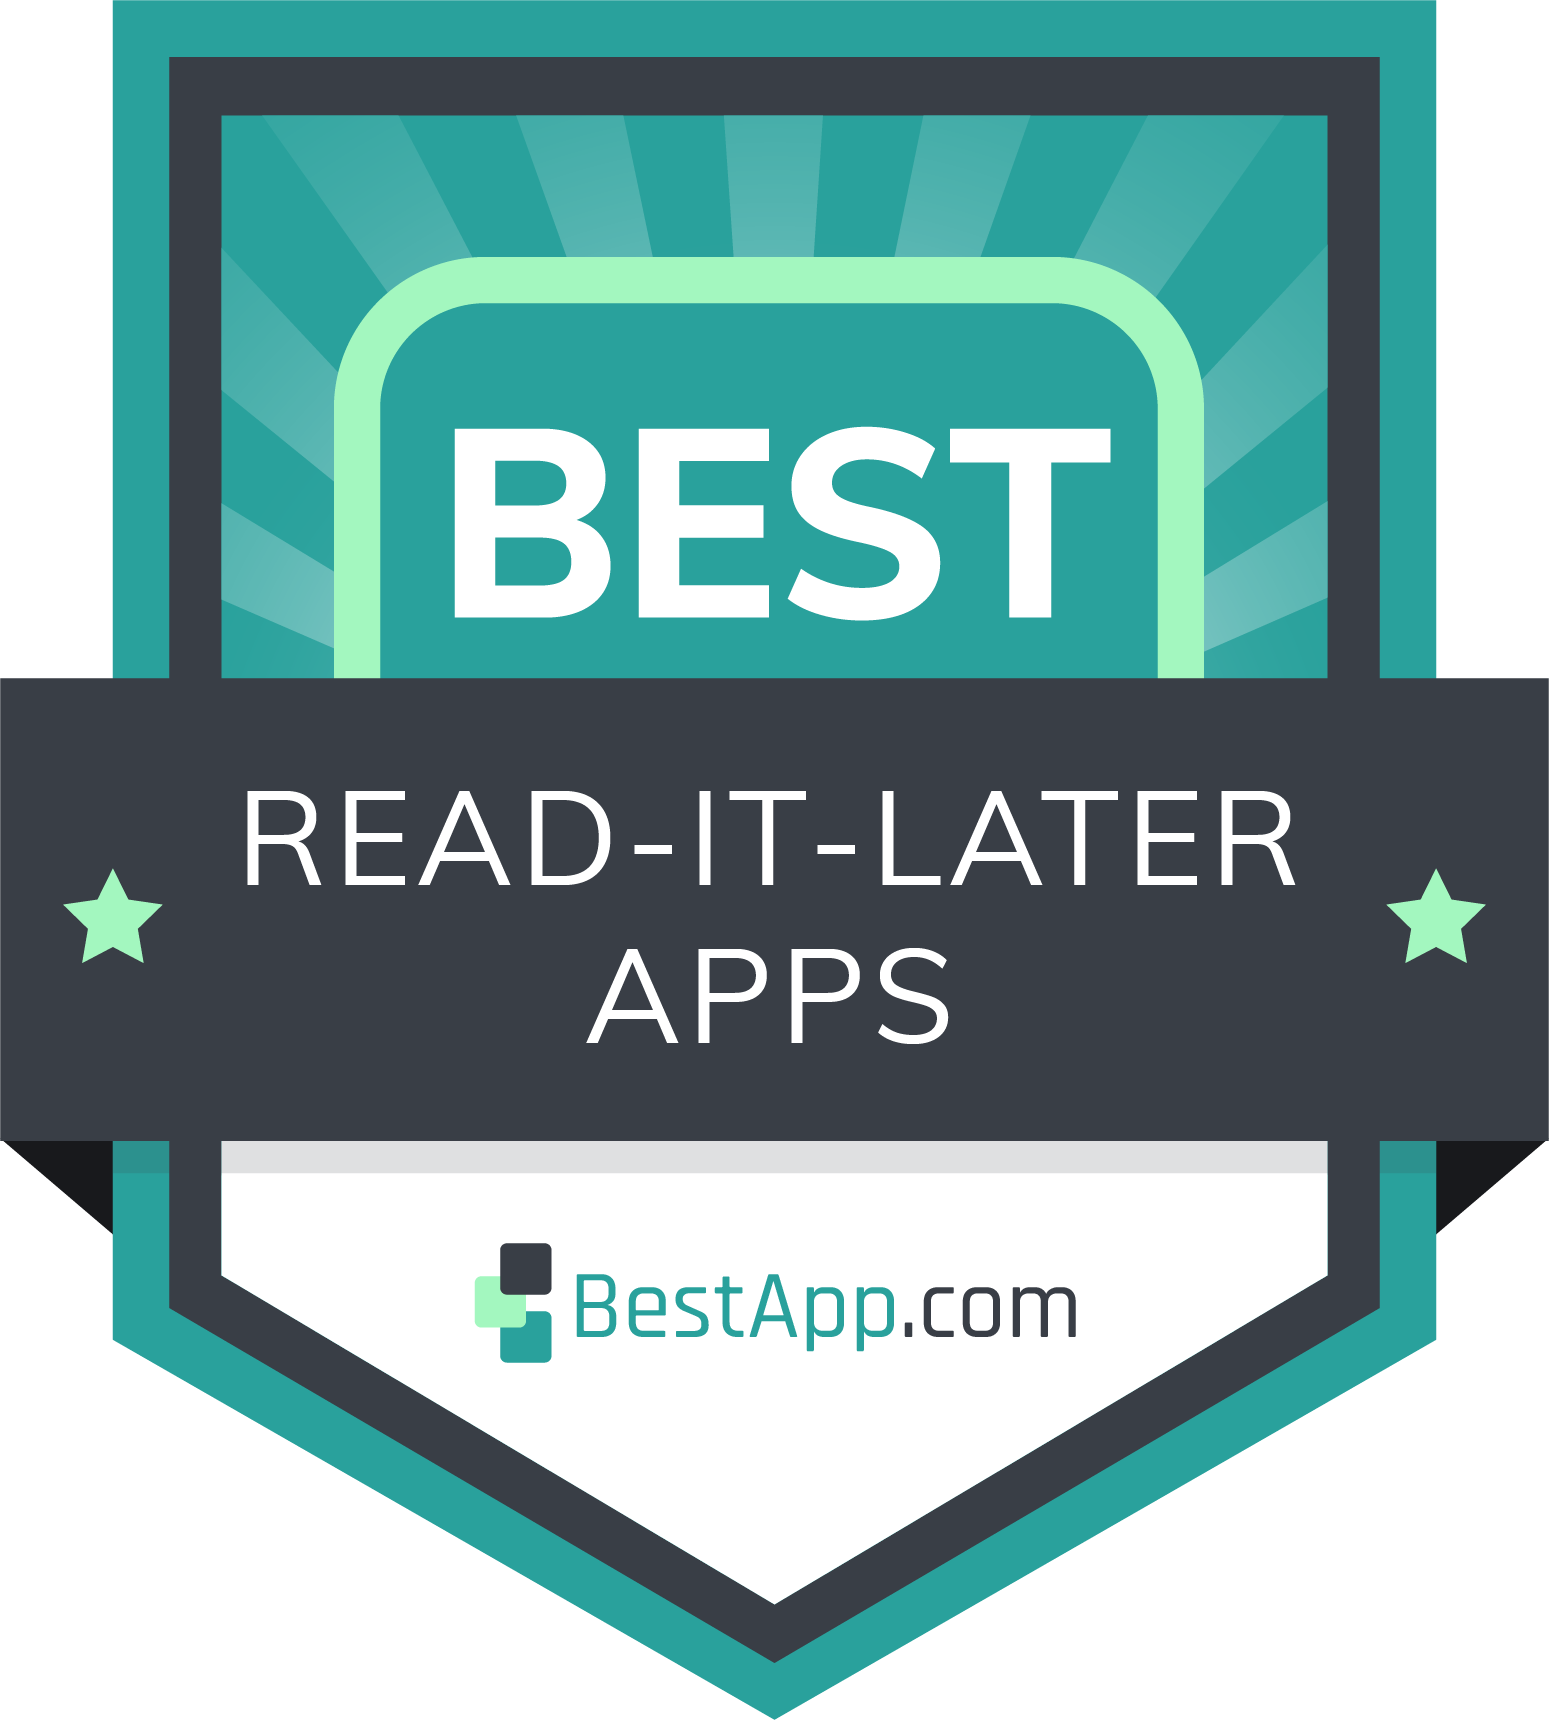 Best Read-It-Later Apps Badge